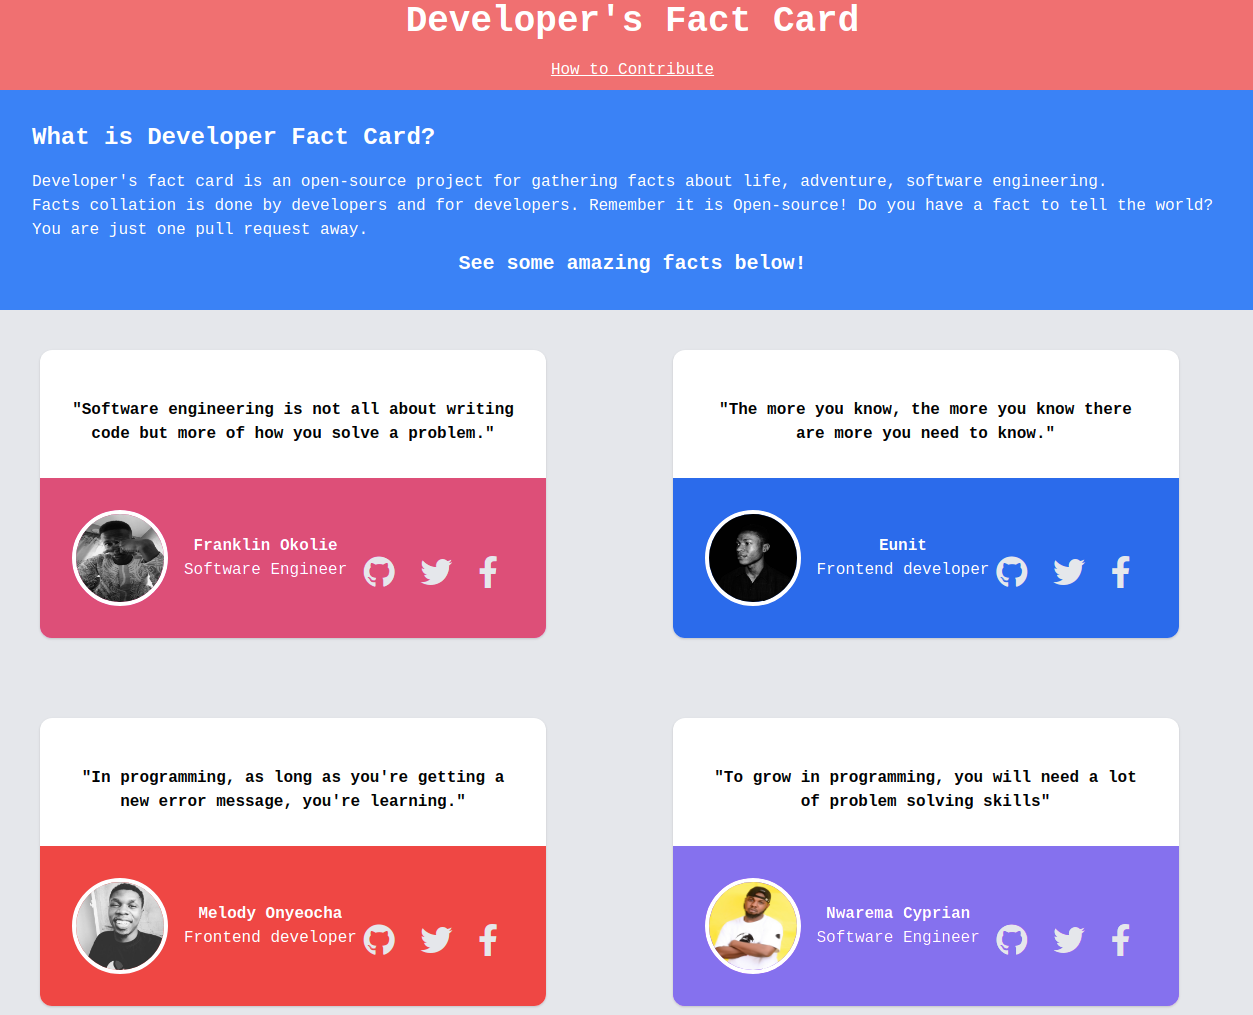 Developers-Fact-Card.png